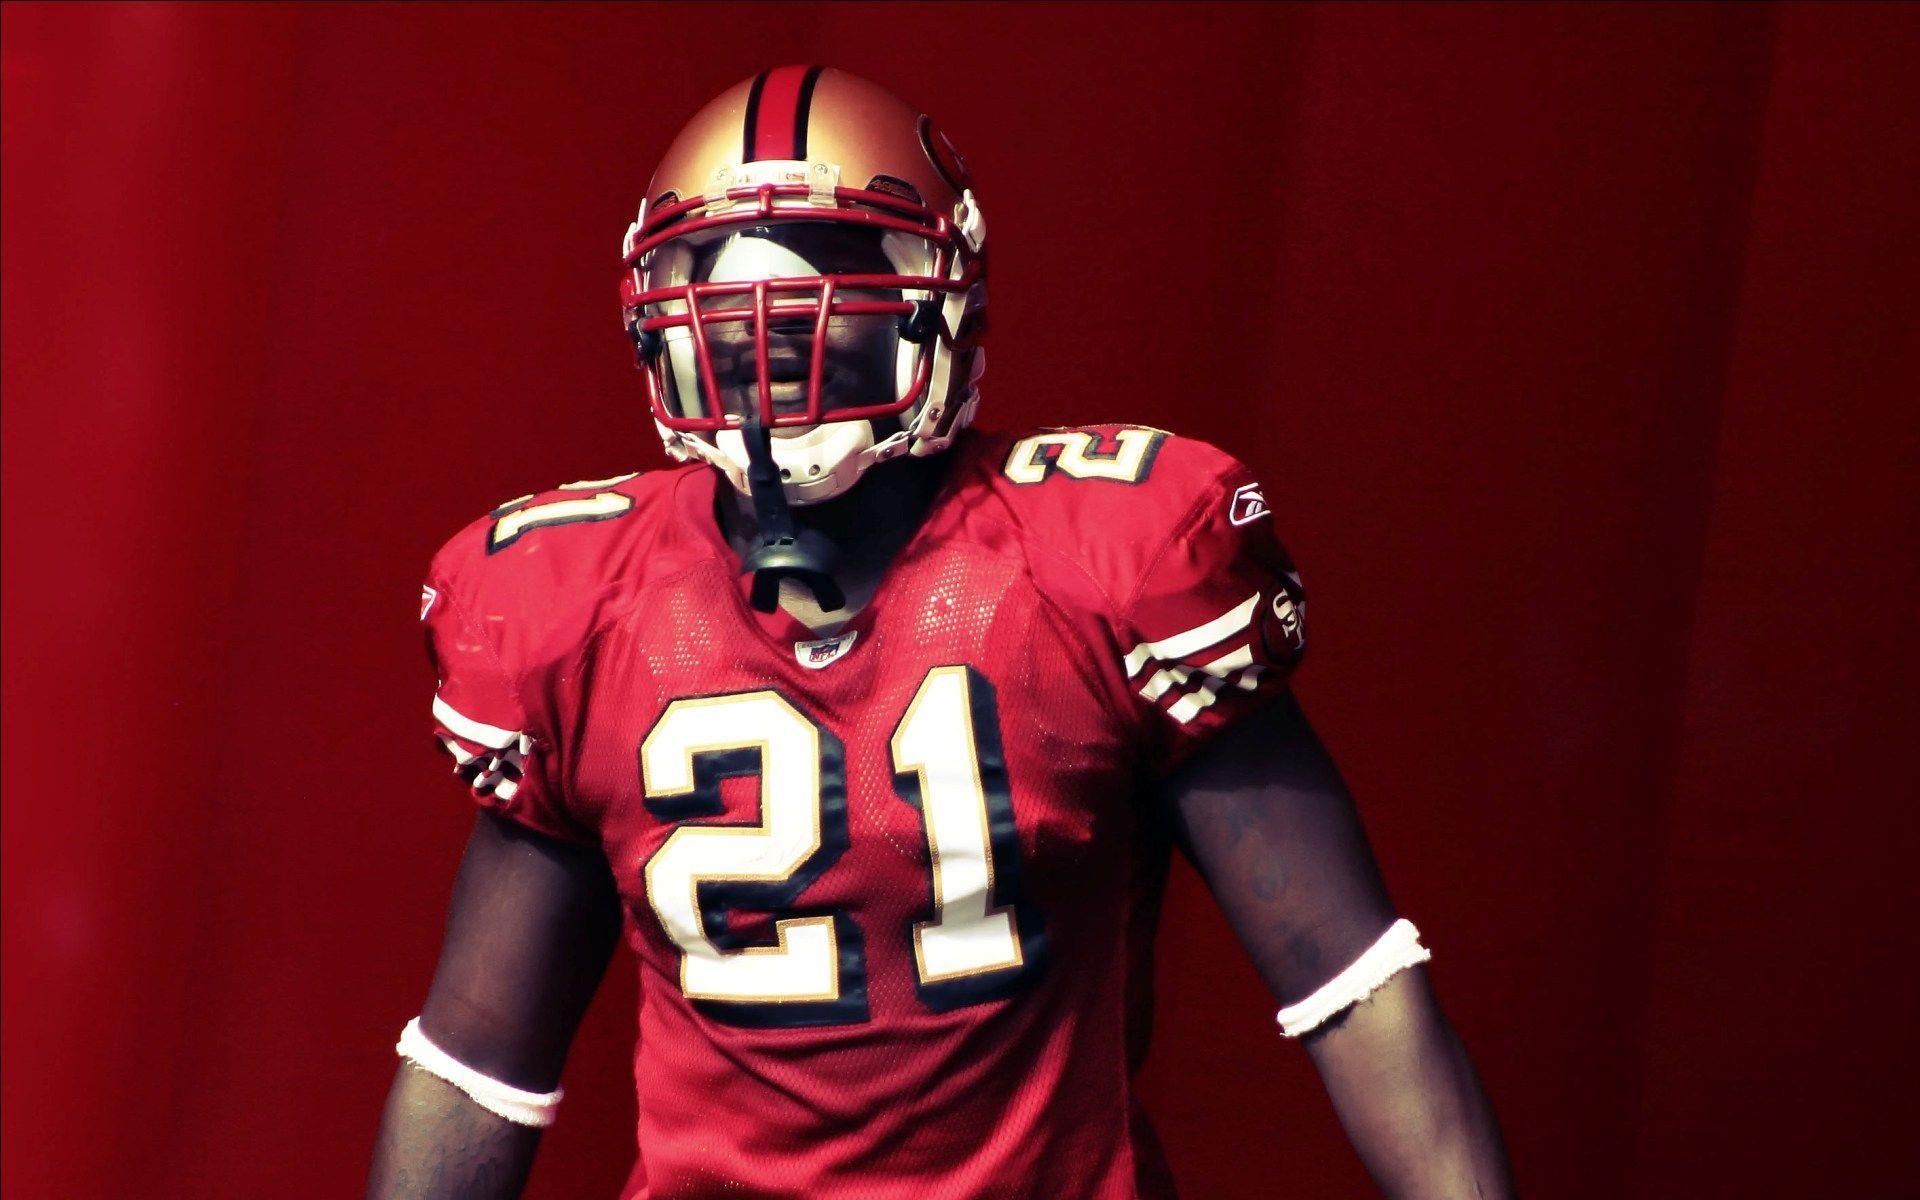 San Francisco 49ers Player Wallpaper. All Best Image Collection